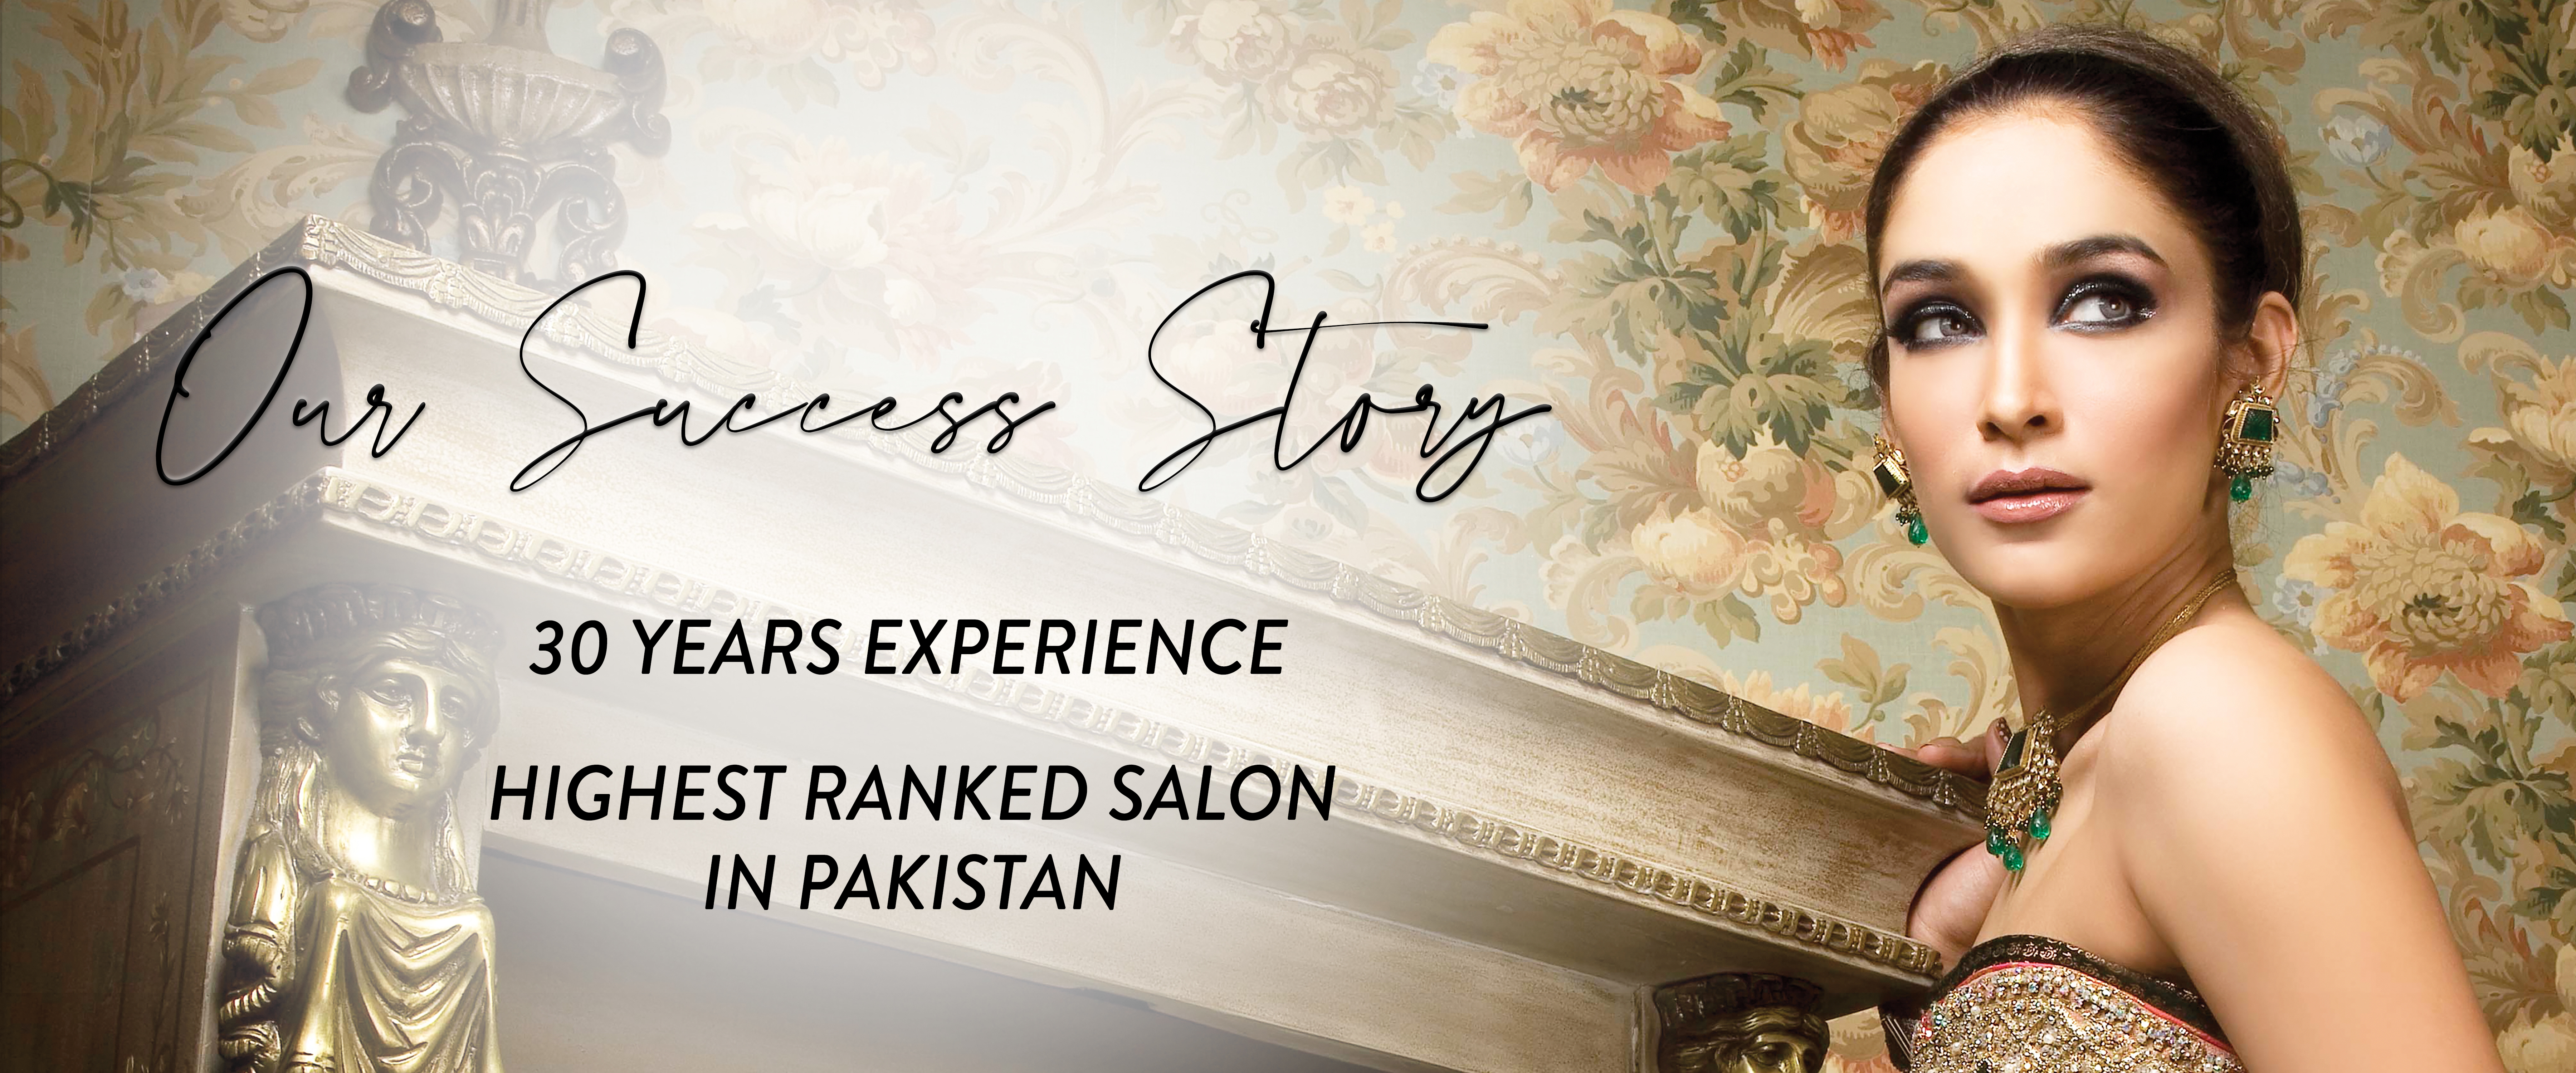 Cosmos Beauty Salon Highest Ranked Beauty Salon in Pakistan With 30 Years of Experience